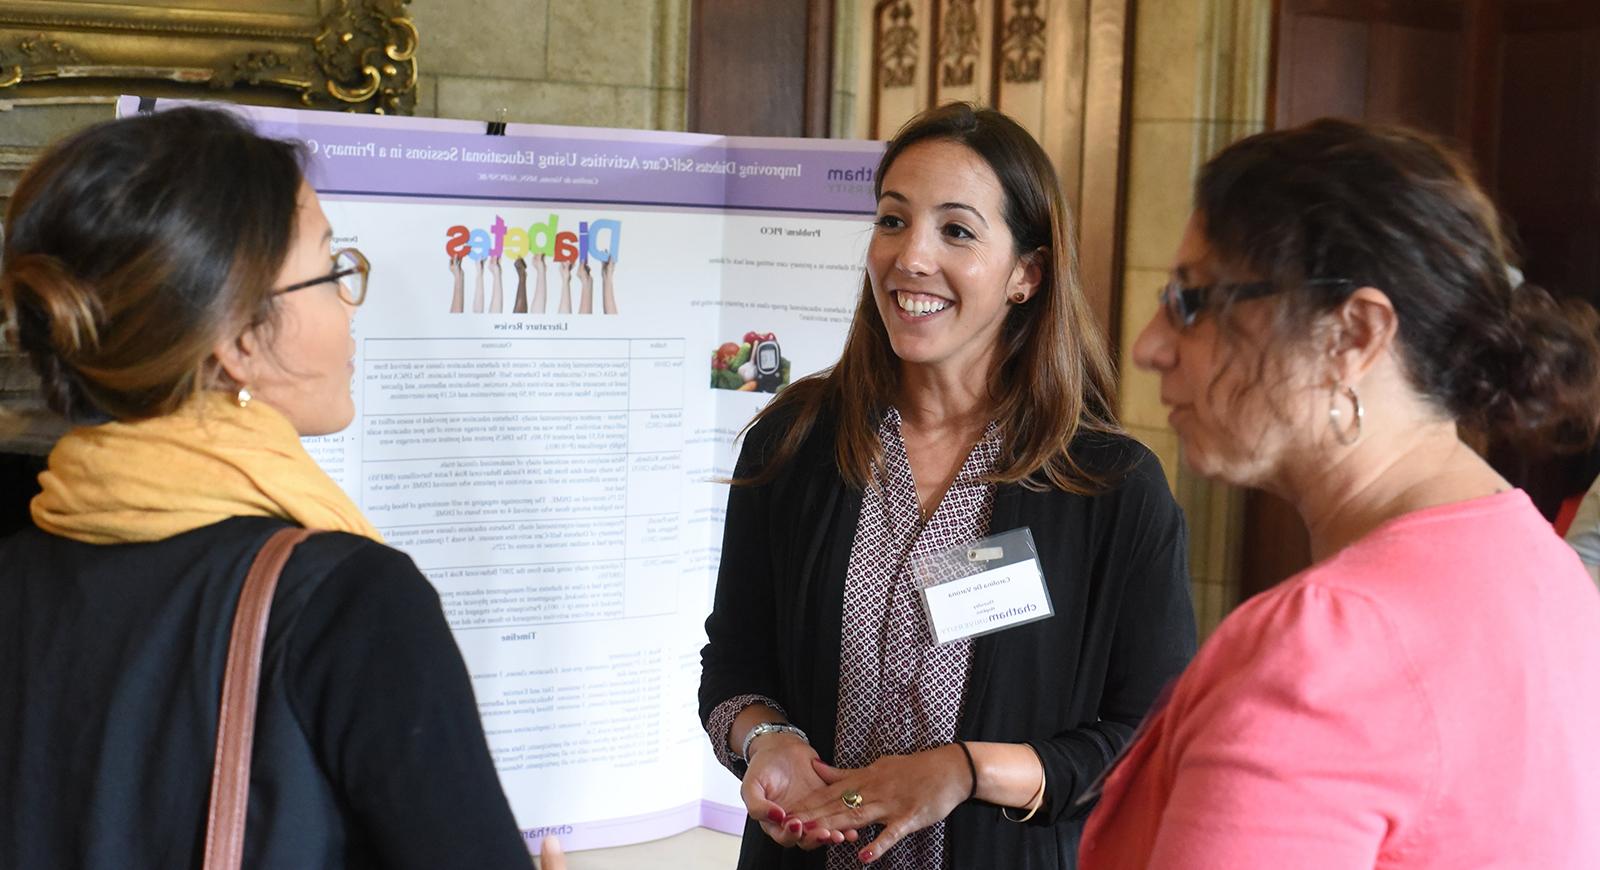 Carolina De Varona speaks to two women wearing business casual attire in front of a poster presentation. 